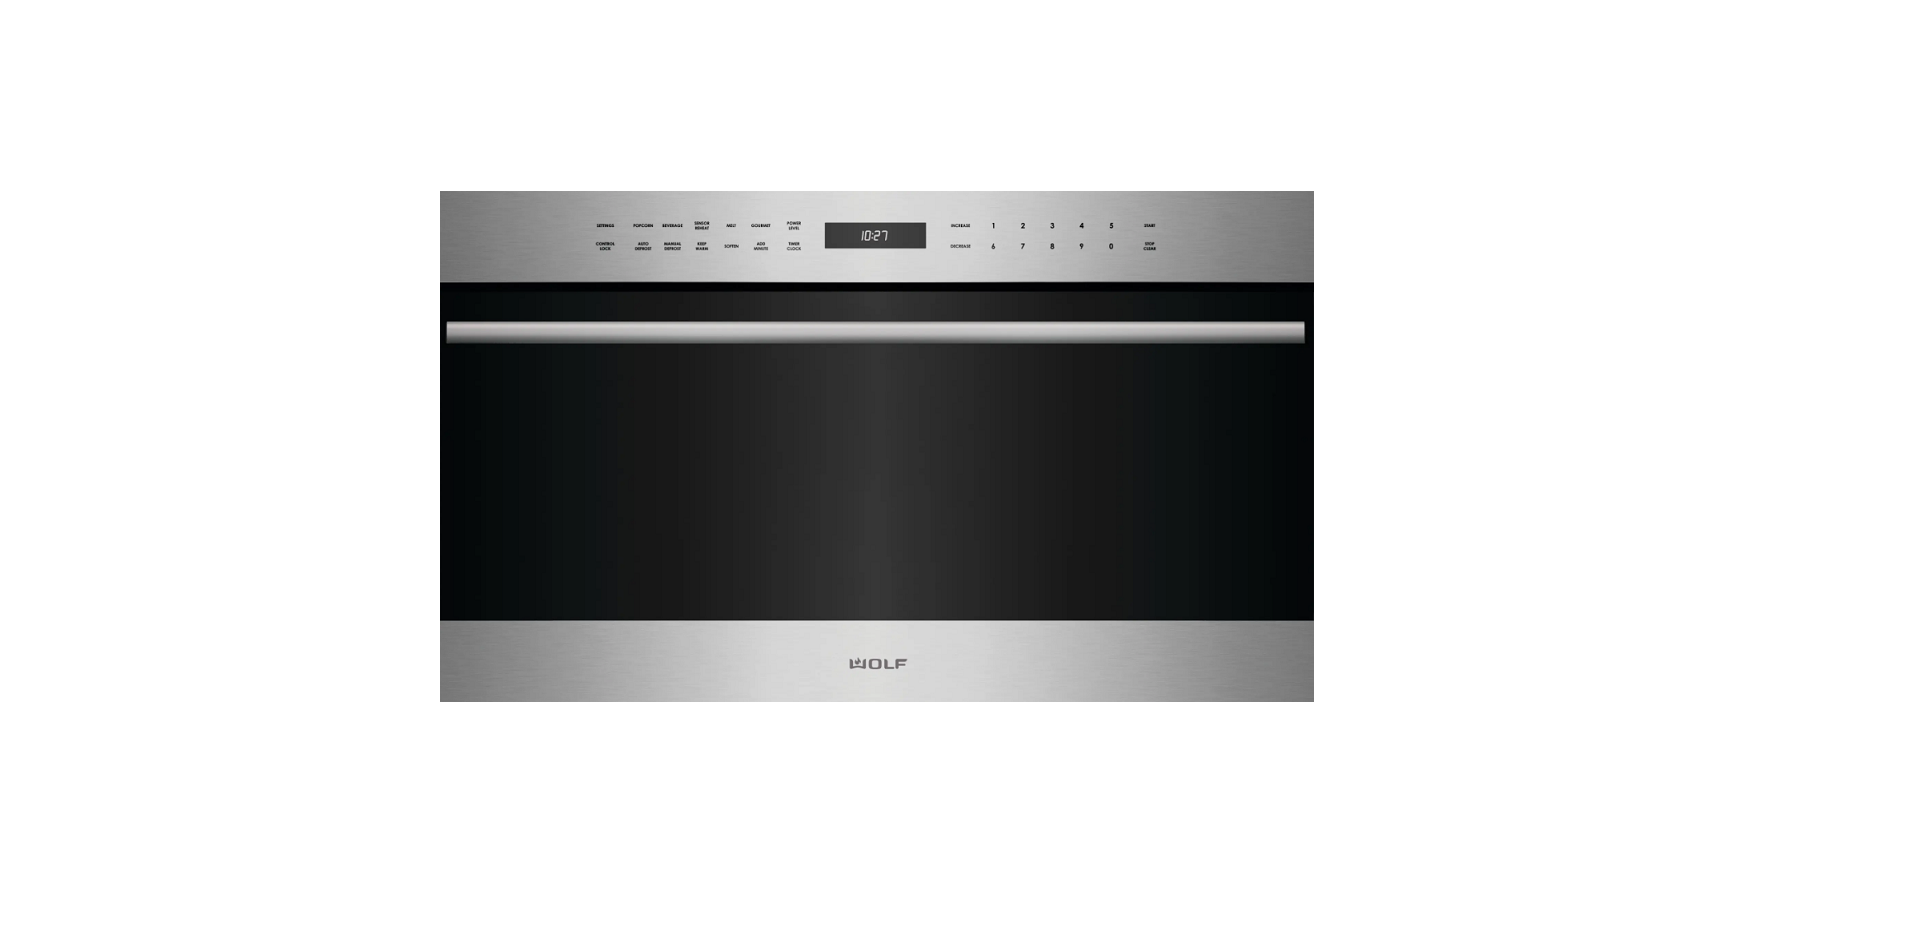 E Series Microwave Oven